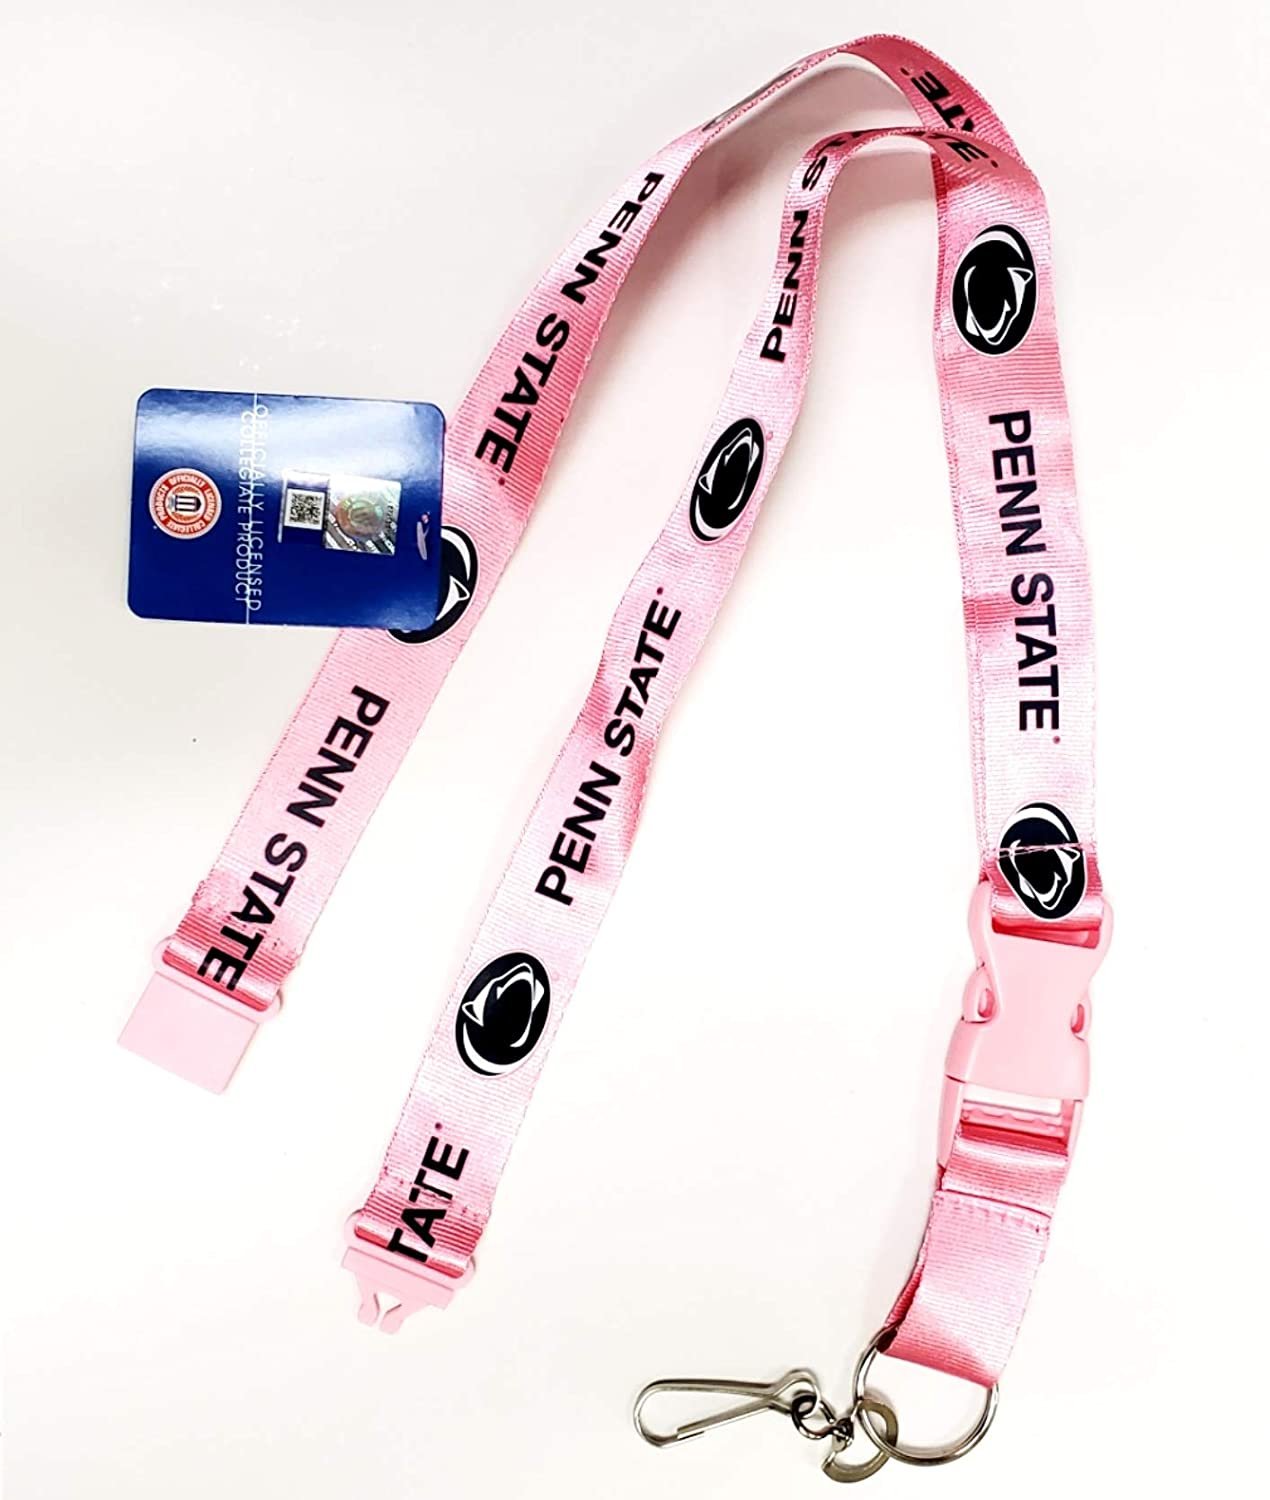 Penn State University Nittany Lions Pink Lanyard Keychain Double Sided Breakaway Safety Design Adult 18 Inch